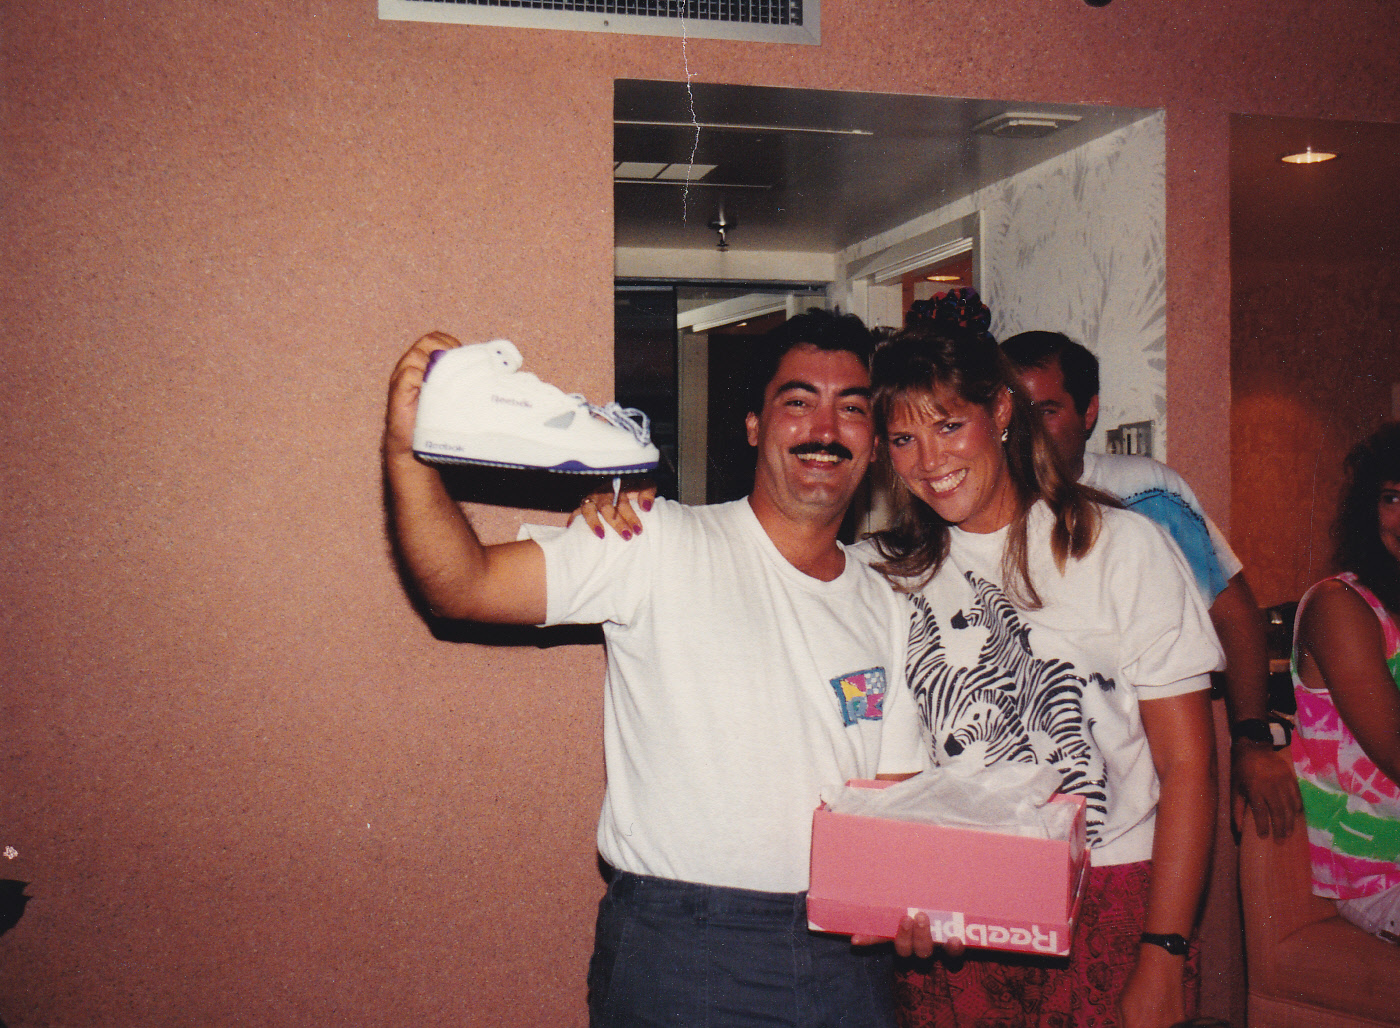 Gift from the gang: Shawn O'Neill and Kim Morgan at the West Palm Beach Reunion in 1990.